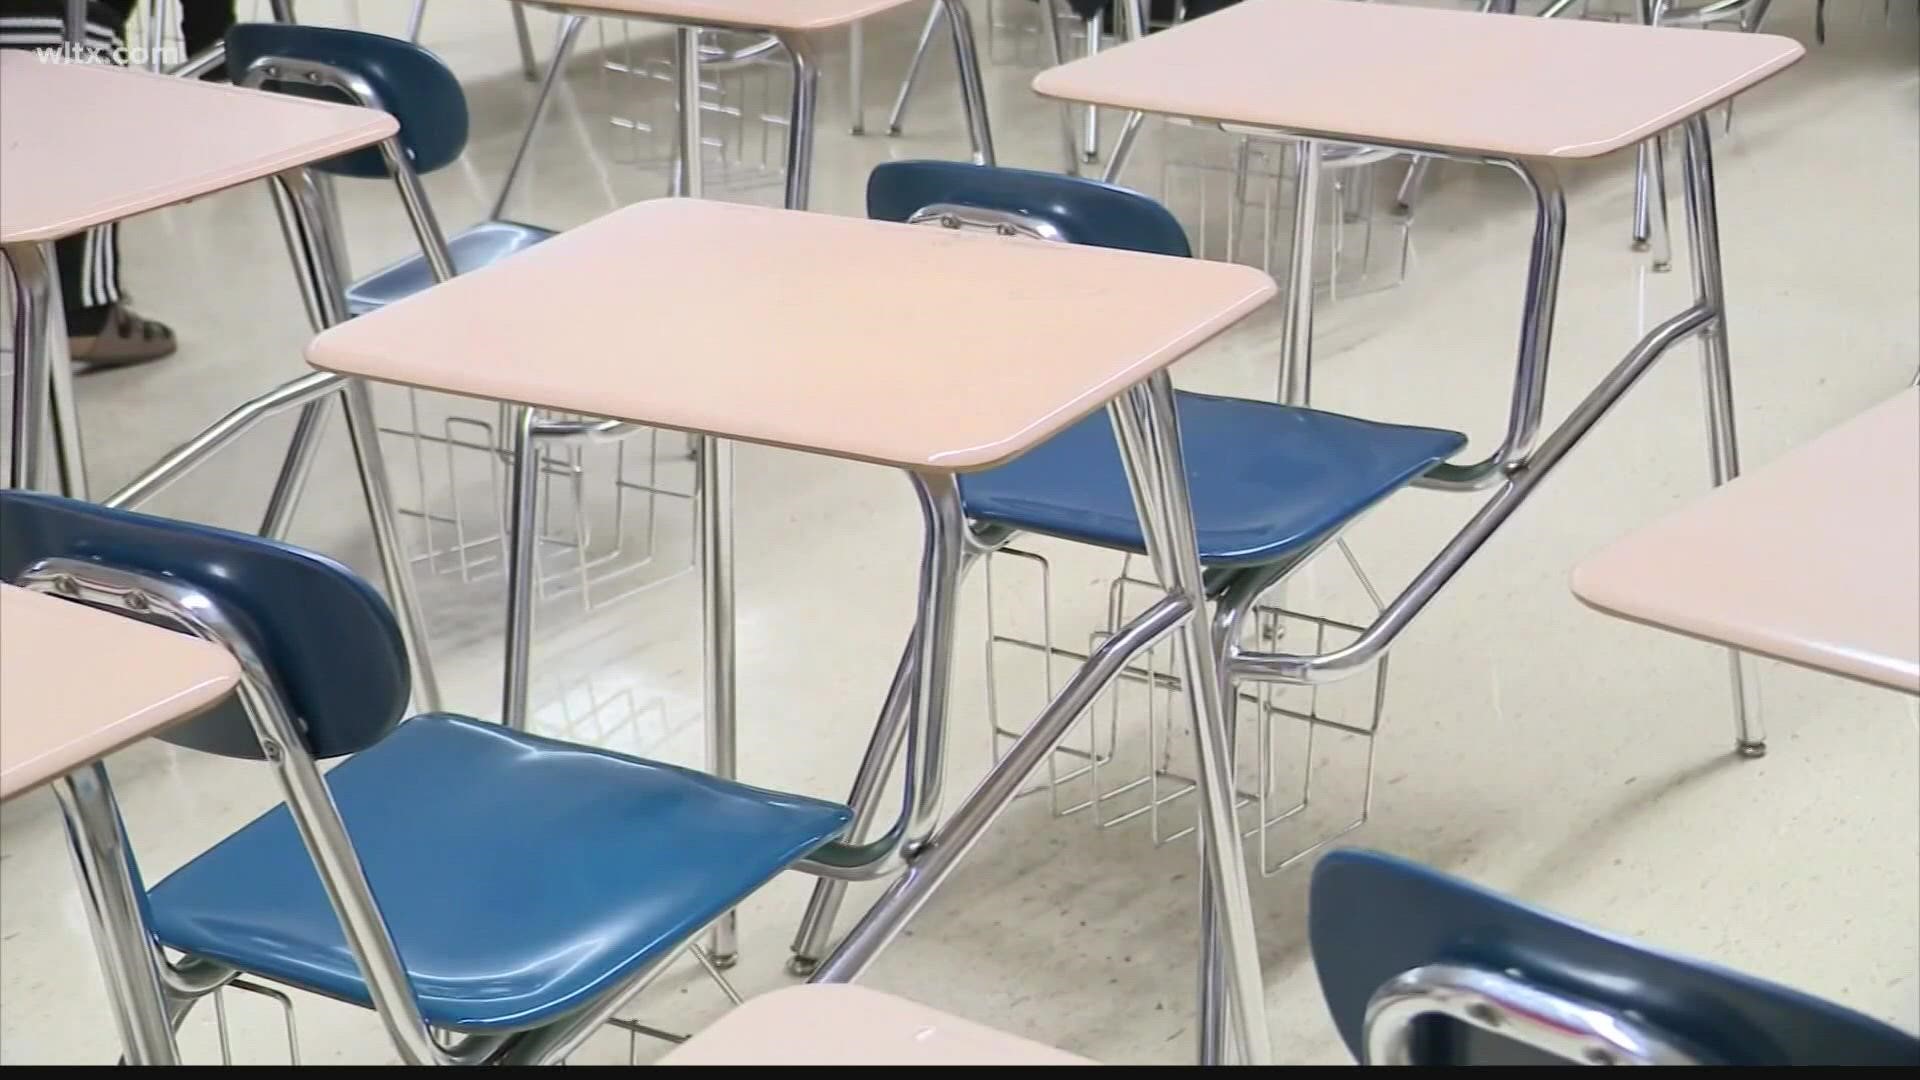 School nurses say they're overworked and exhausted as COVID-19 cases continue to surge in South Carolina schools.